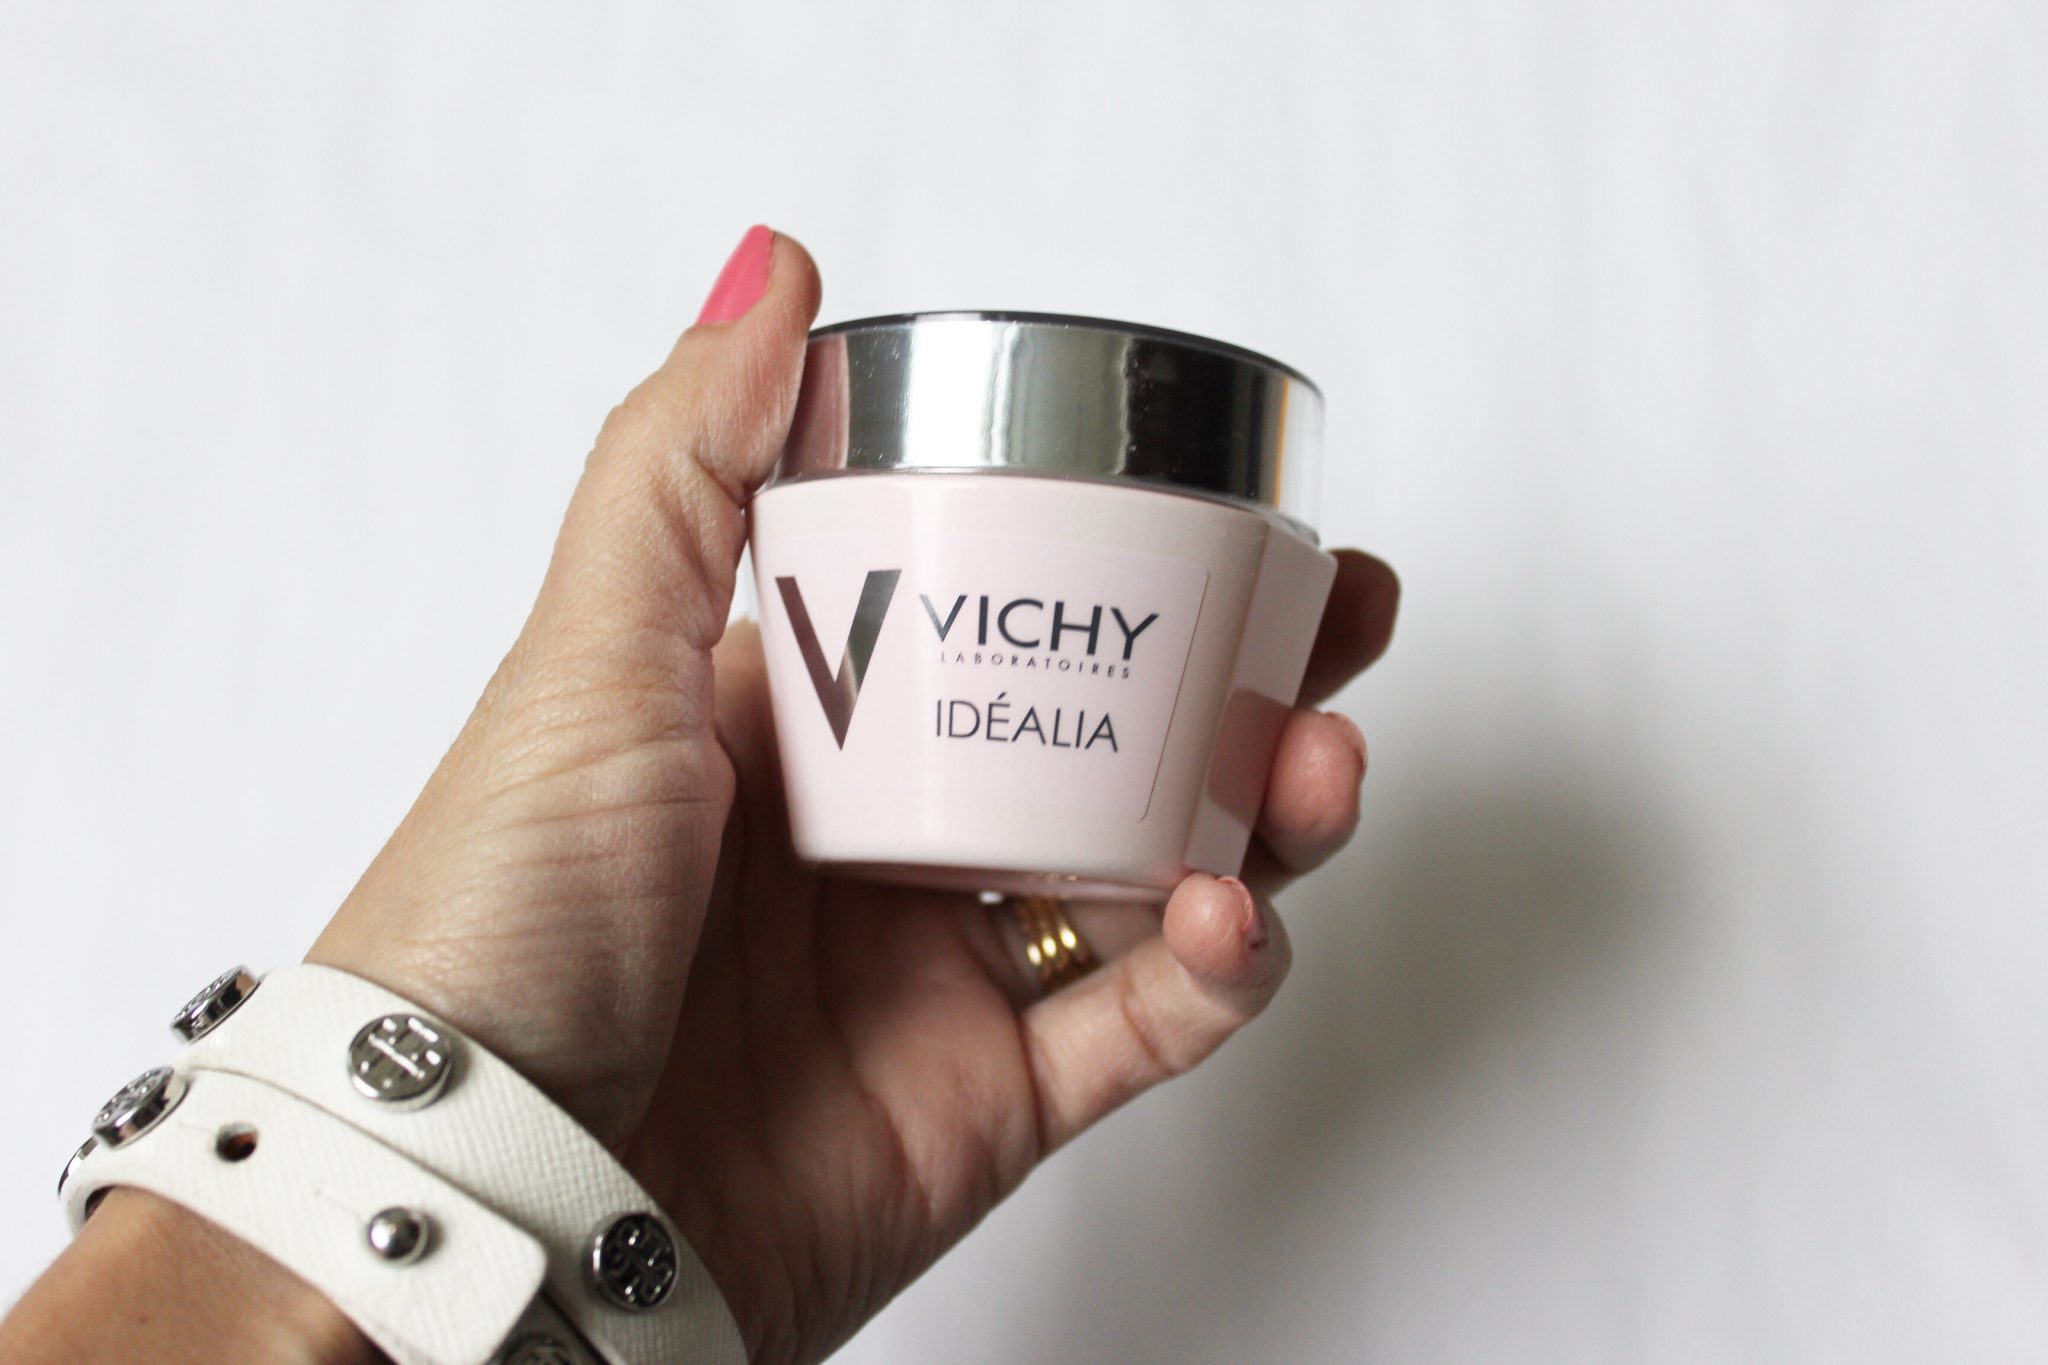 Review of Vichy Idéalia Day Care + A Giveaway!